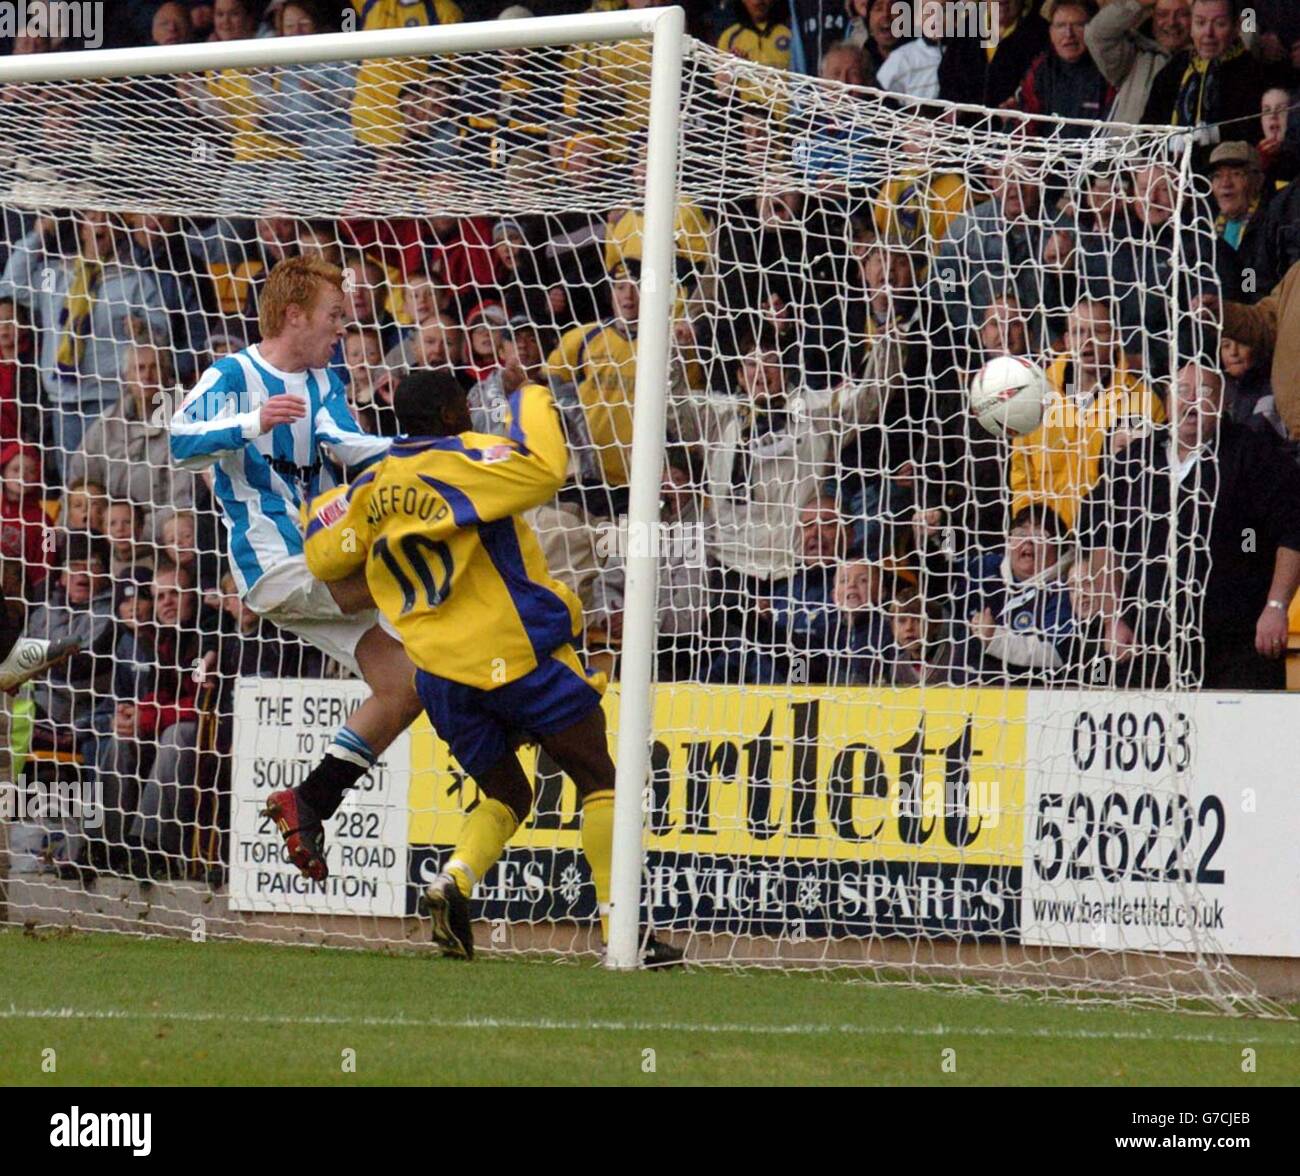 Torquay's Jonathan Kuffour scores the winning goal against Huddersfield during their Coca Cola League One match at Plainmoor, Torquay. NO UNOFFICIAL CLUB WEBSITE USE. Stock Photo